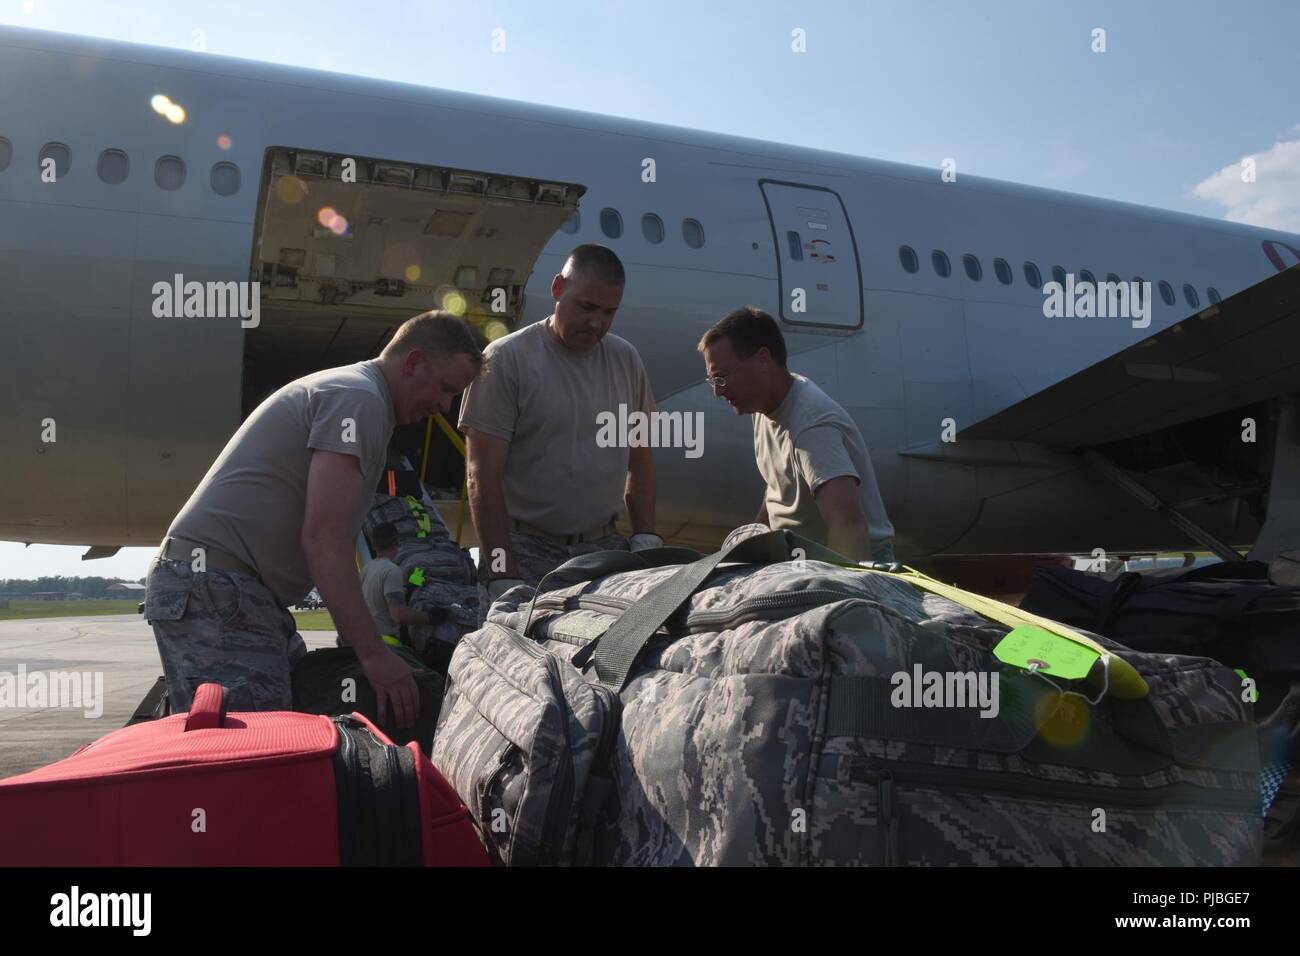 U.S. Airmen of the 169th Fighter Wing of the South Carolina Air National Guard at McEntire Joint National Guard Base, South Carolina, load luggage onto  a civilian-contracted large transport aircraft, July 11, 2018. The South Carolina Air National Guard’s 169th Fighter Wing is deploying nearly 300 Airmen and approximately a dozen F-16 Block 52 Fighting Falcon fighter jets to the 407th Air Expeditionary Group in Southwest Asia in support of an Air Expeditionary Force rotation. Stock Photo